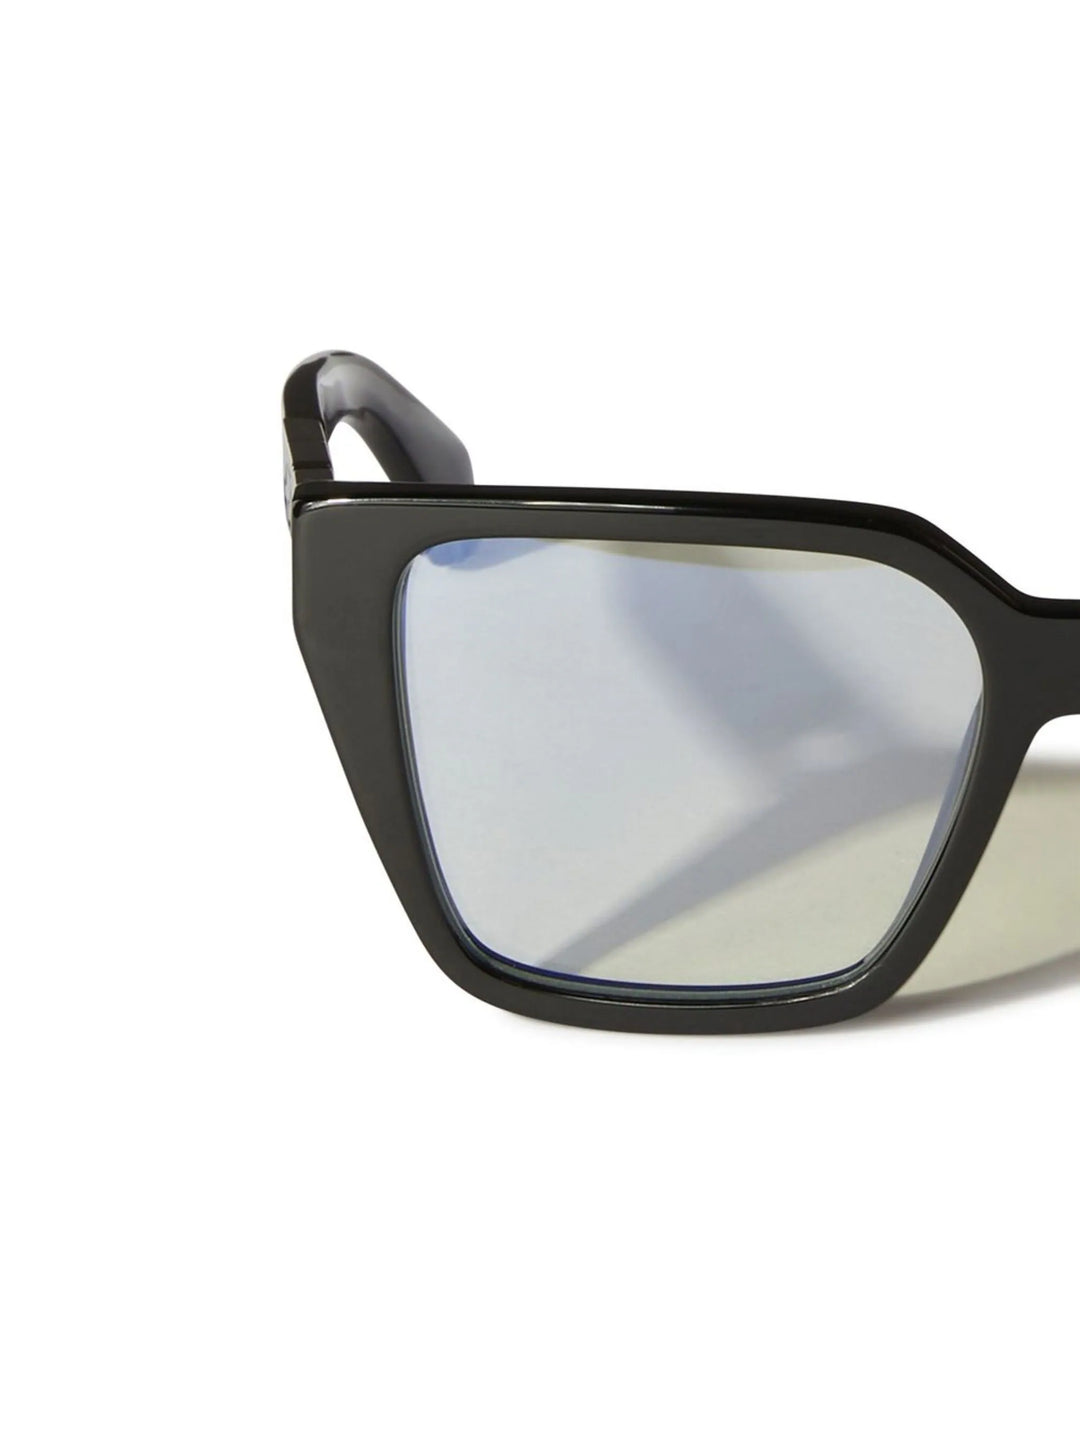 Off-White square-frame optical glasses Veronique Luxury Collections